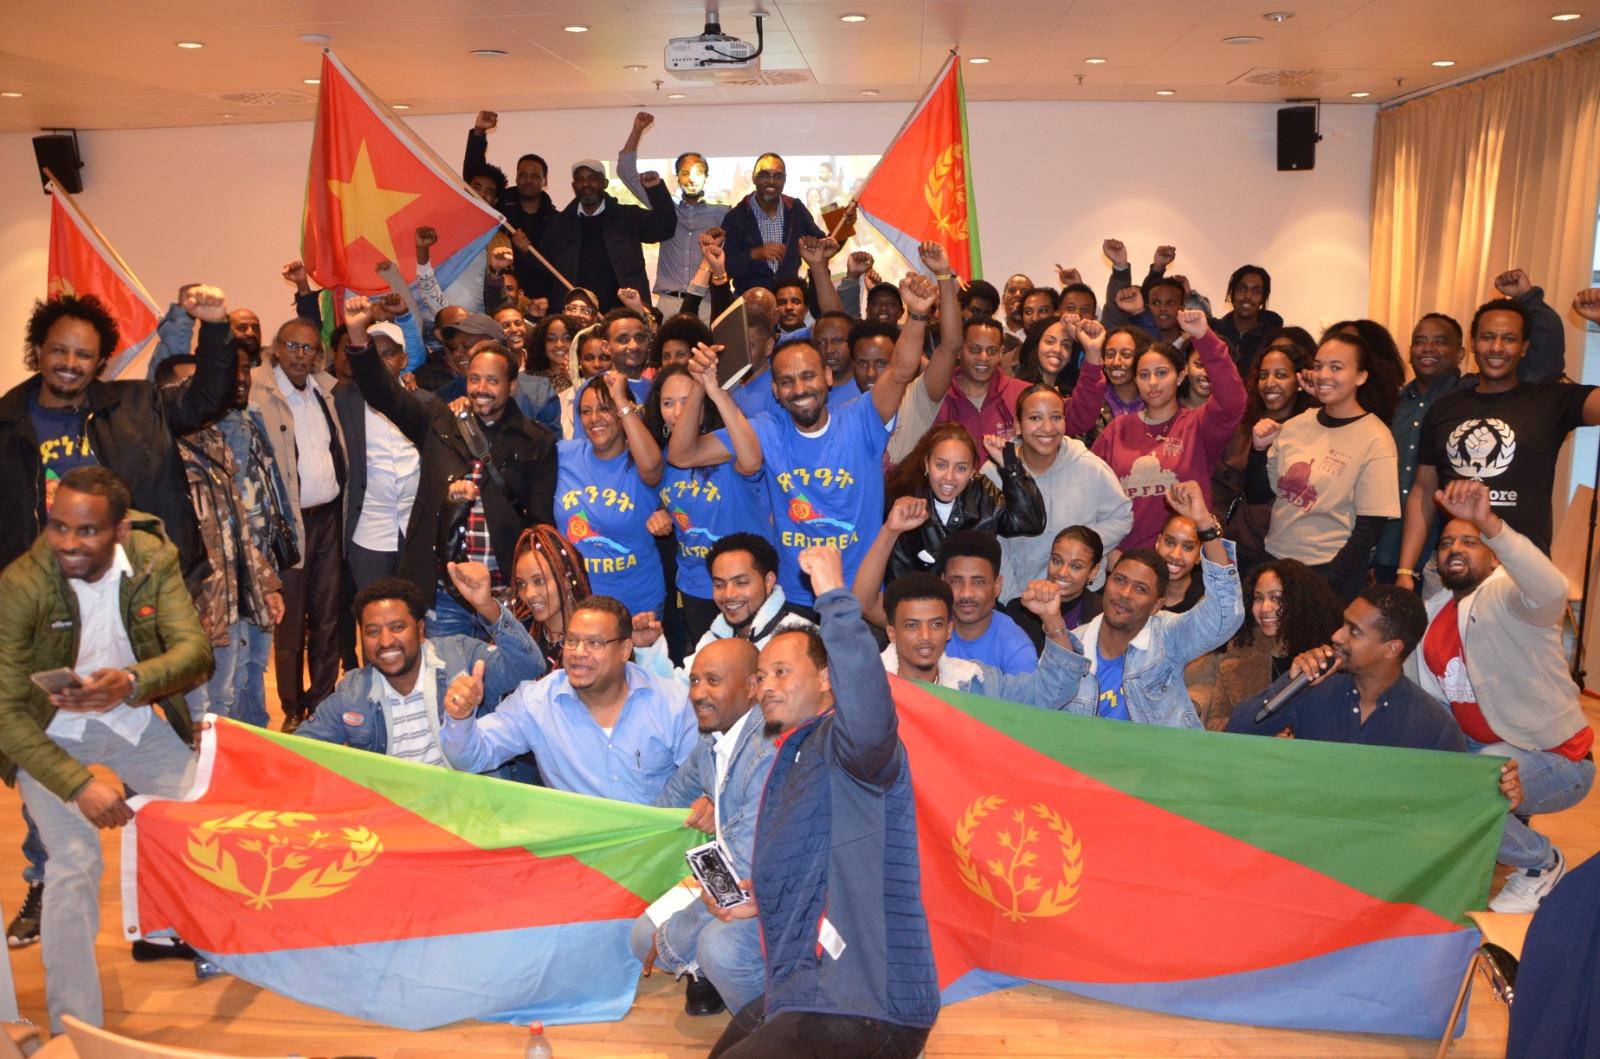 Congress of Eritrean youth organization in Germany